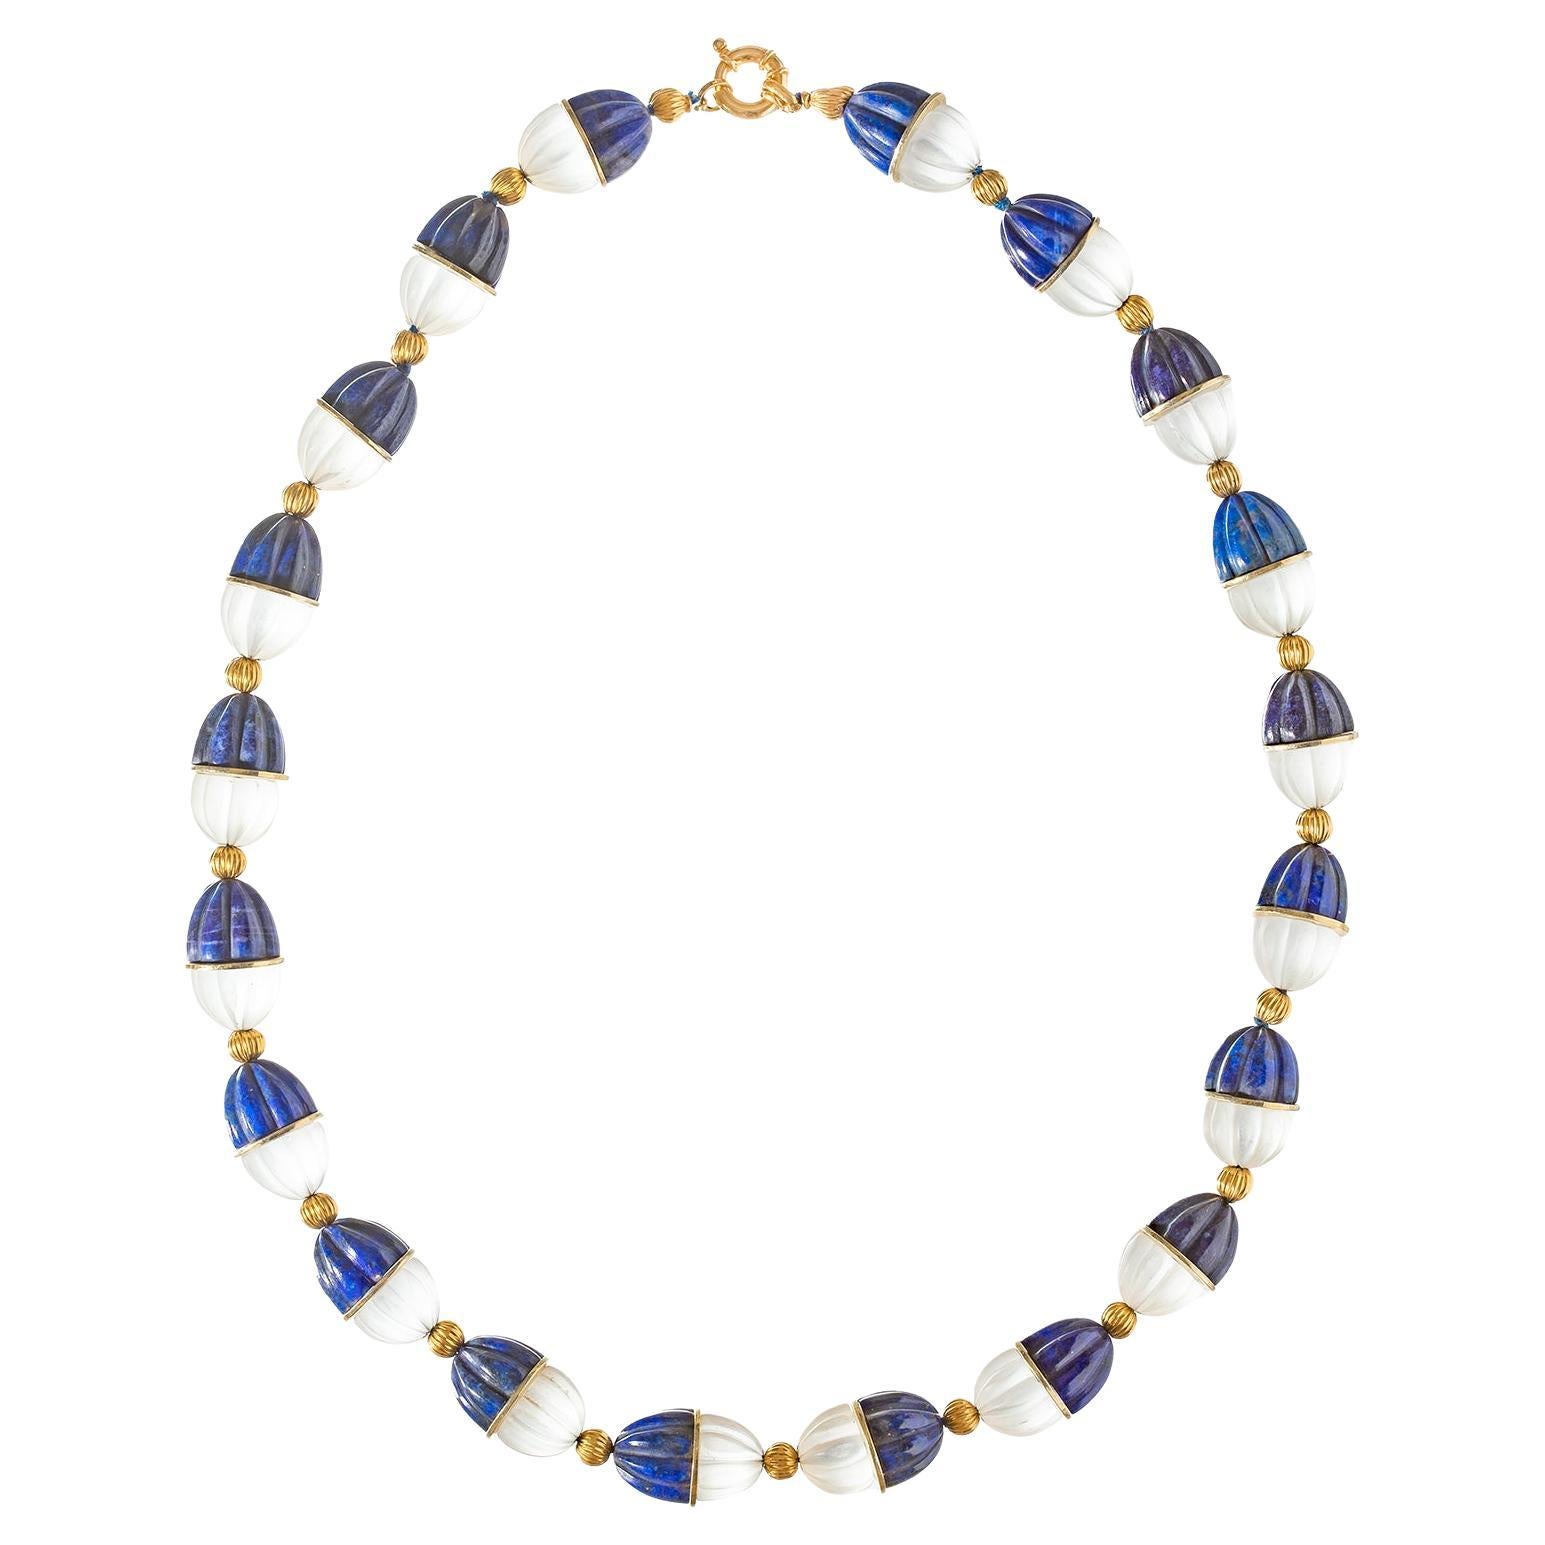 Carved Lapis Lazuli Rock Crystal Gold Bead Necklace